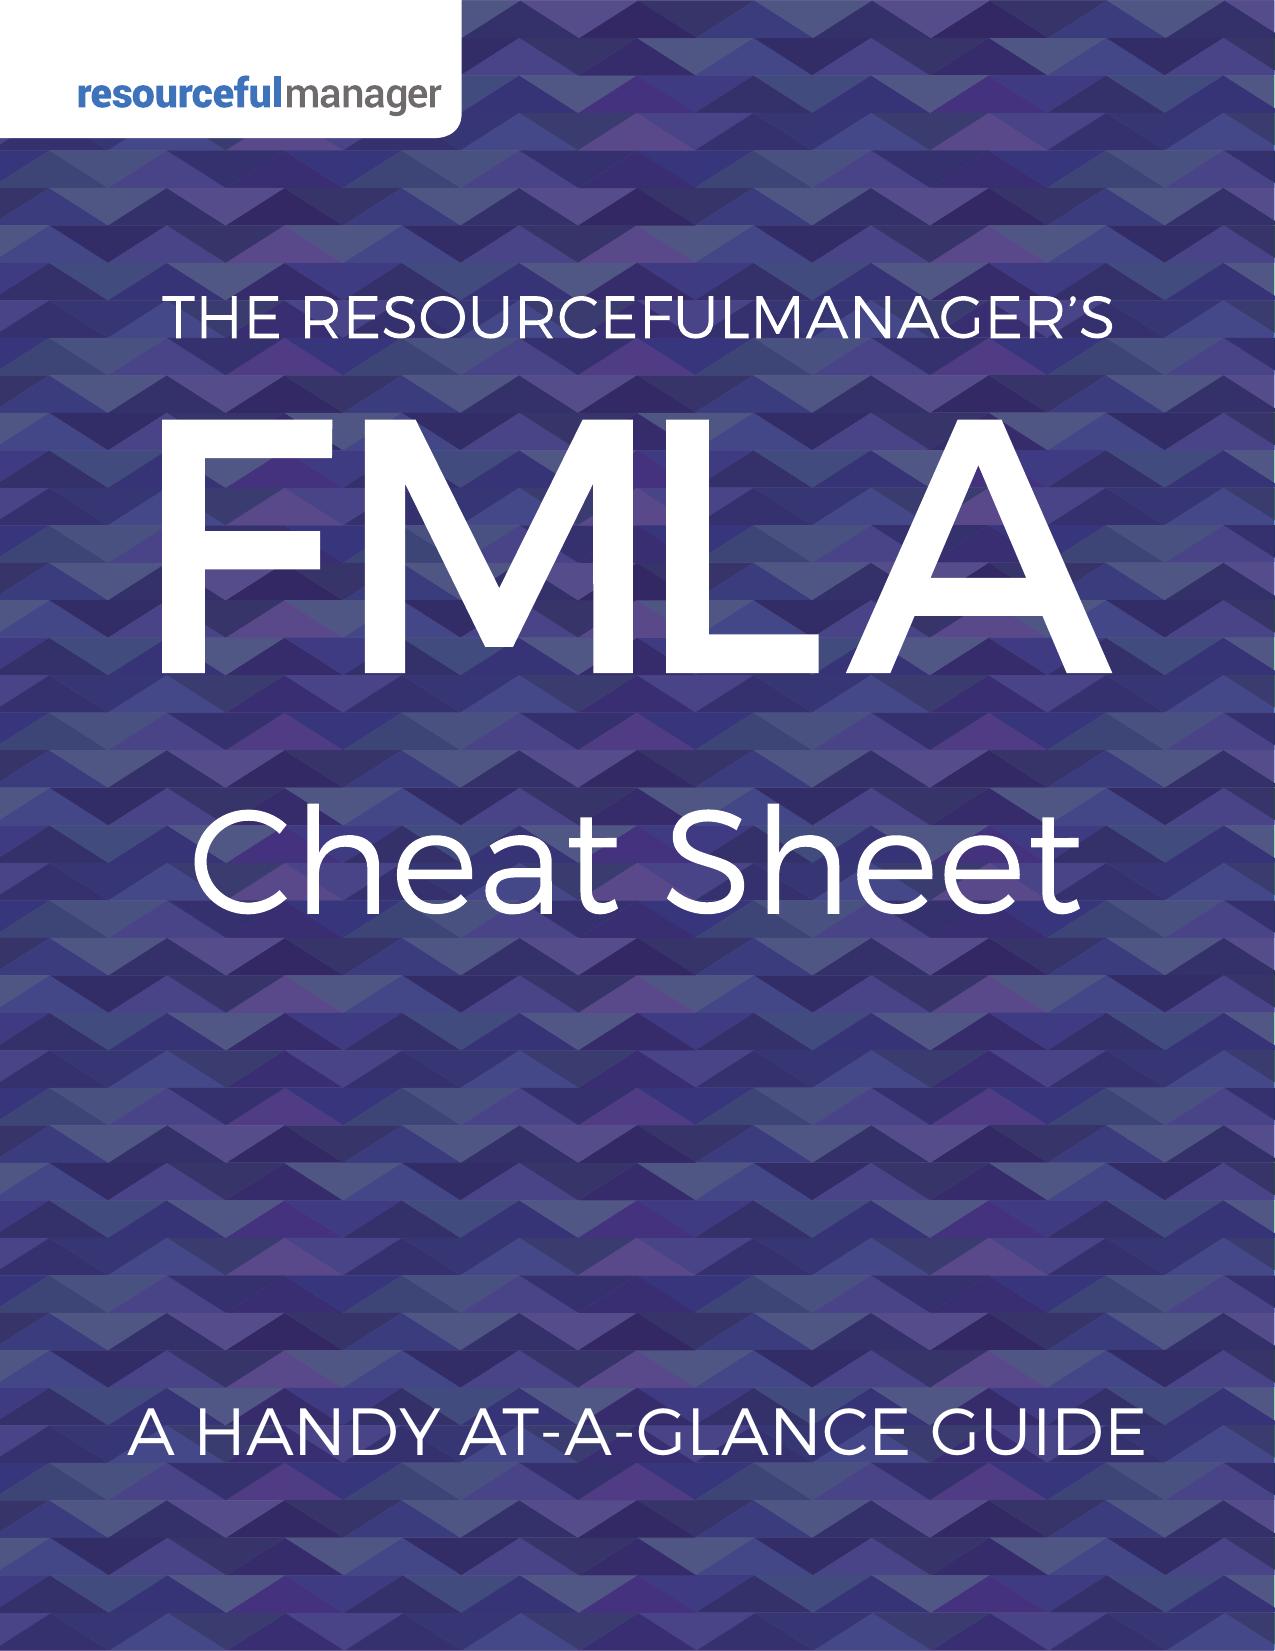 The Resource Manager's FMLA Cheat Sheet